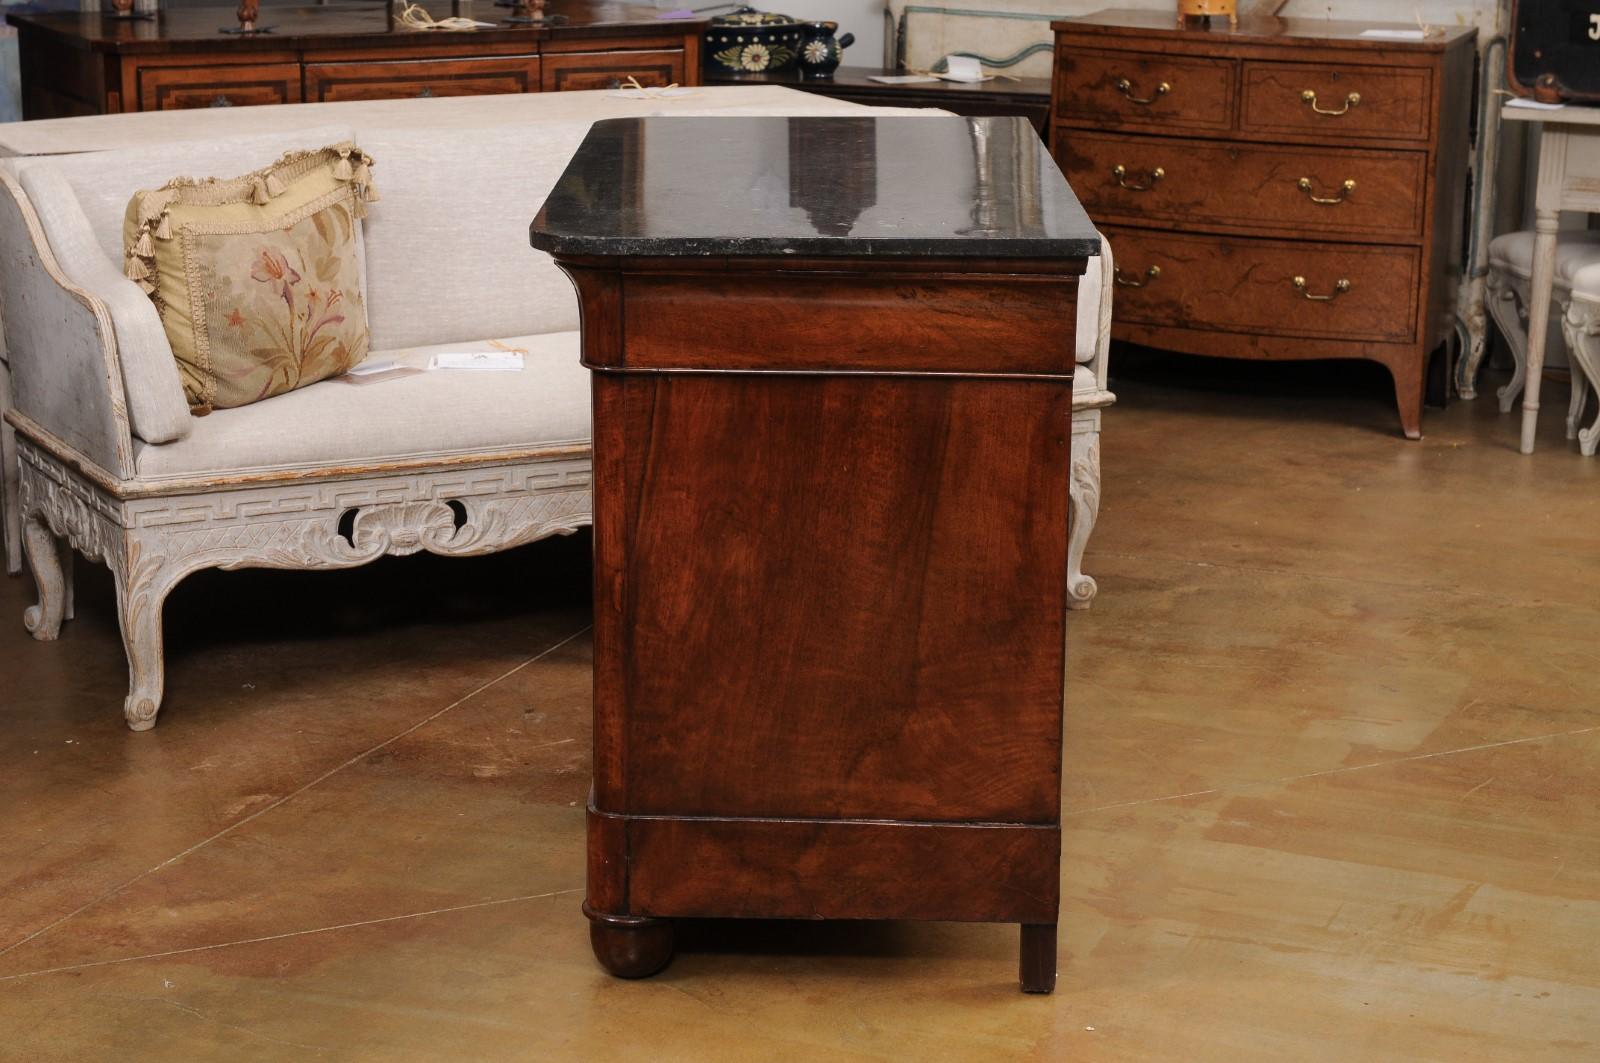 Italian Empire Style 1890s Marble Top Four-Drawer Commode with Bronze Hardware For Sale 6